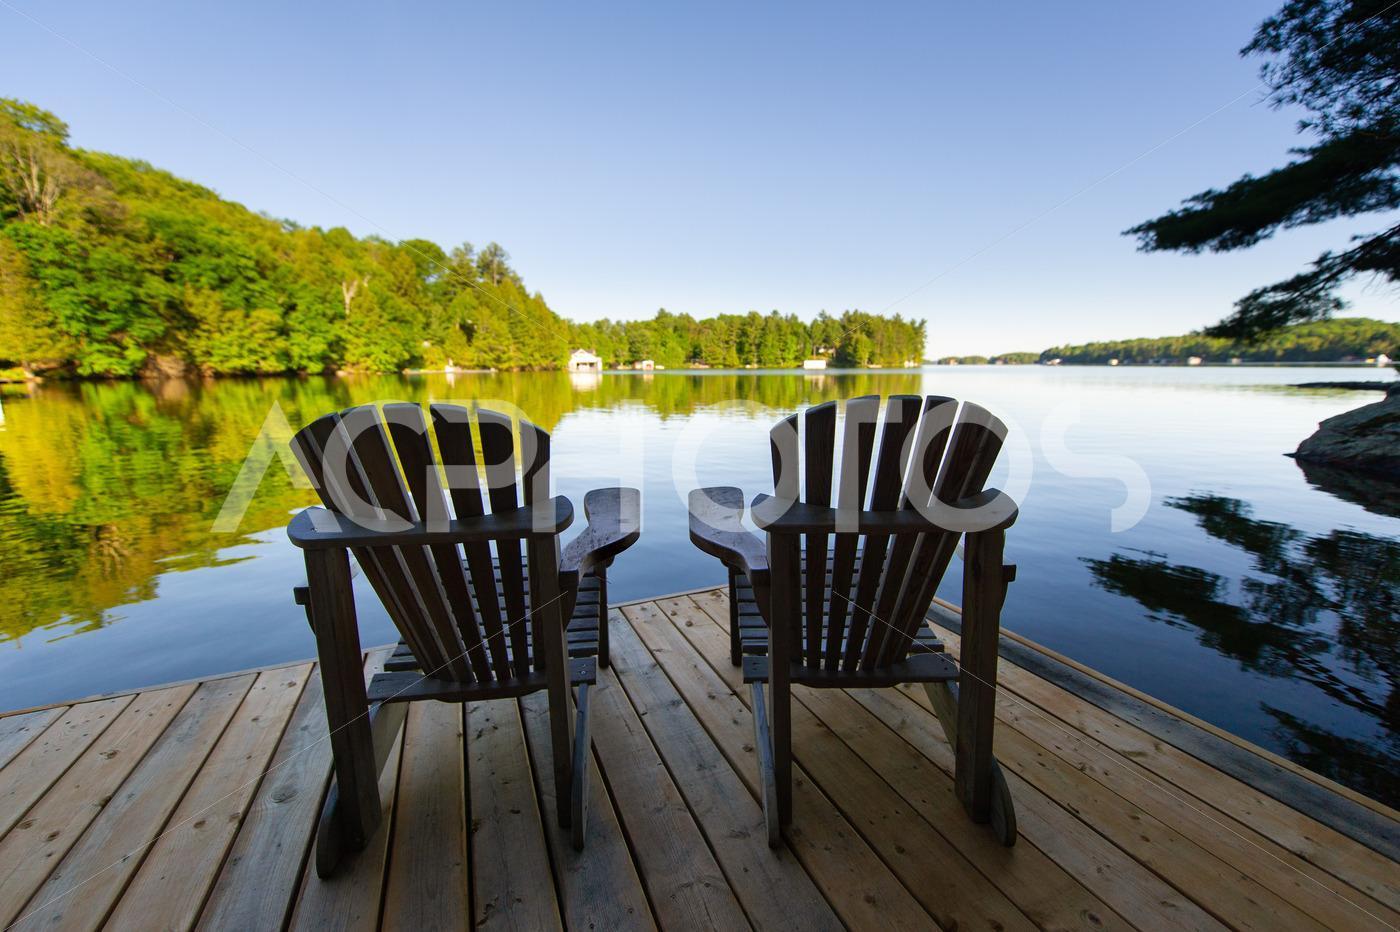 Adirondack chairs sitting on a wooden dock 2892